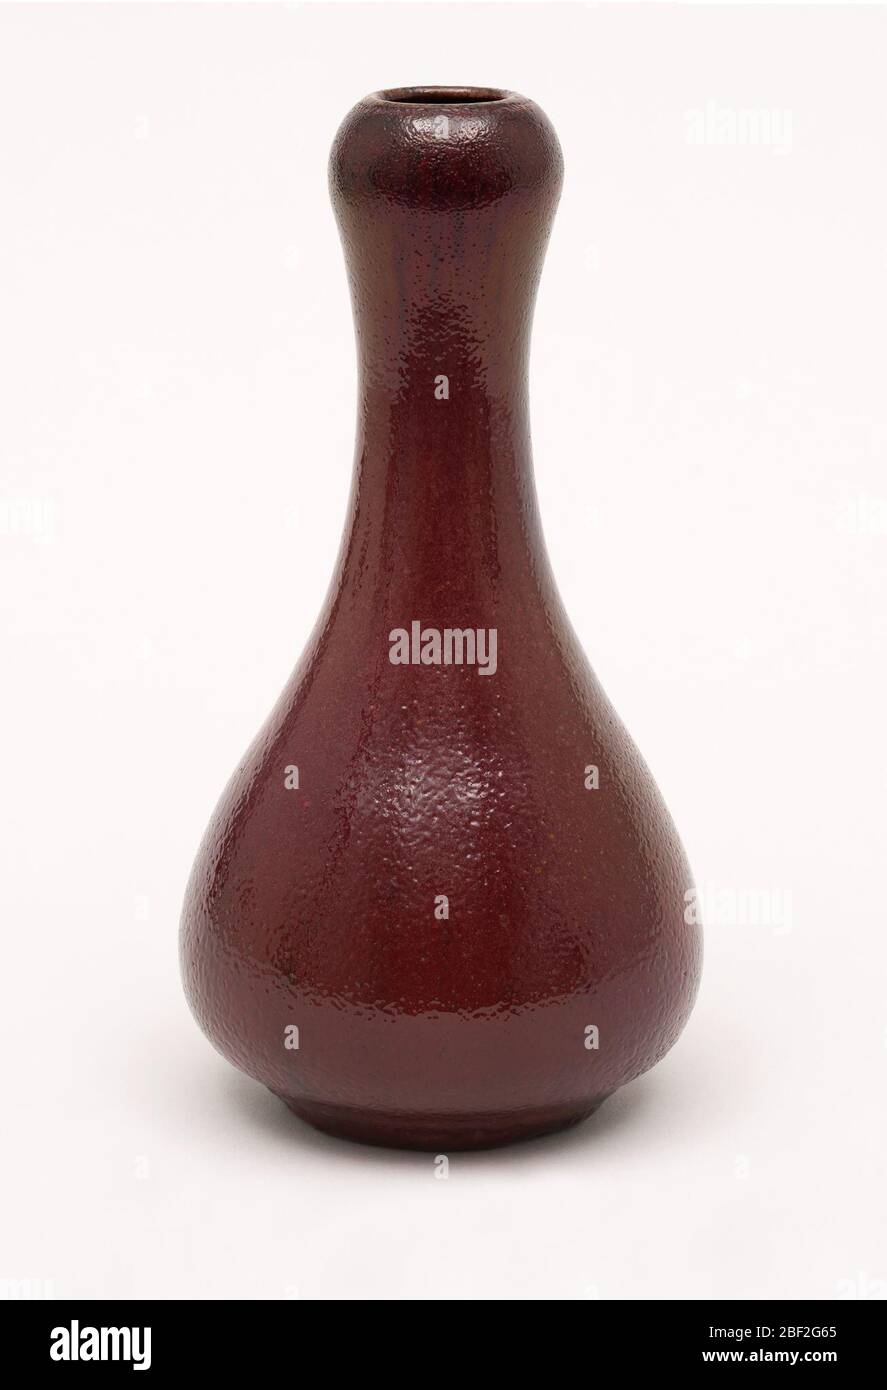 Vase. Gray-white stoneware body, thrown. Bulbous body with tapering neck; with slightly bulging area below rim; flat foot. Covered with a deep red or scarlet glaze with slight golden luster effect. Black striations through glaze. Very dark red at rim bulge. Stock Photo